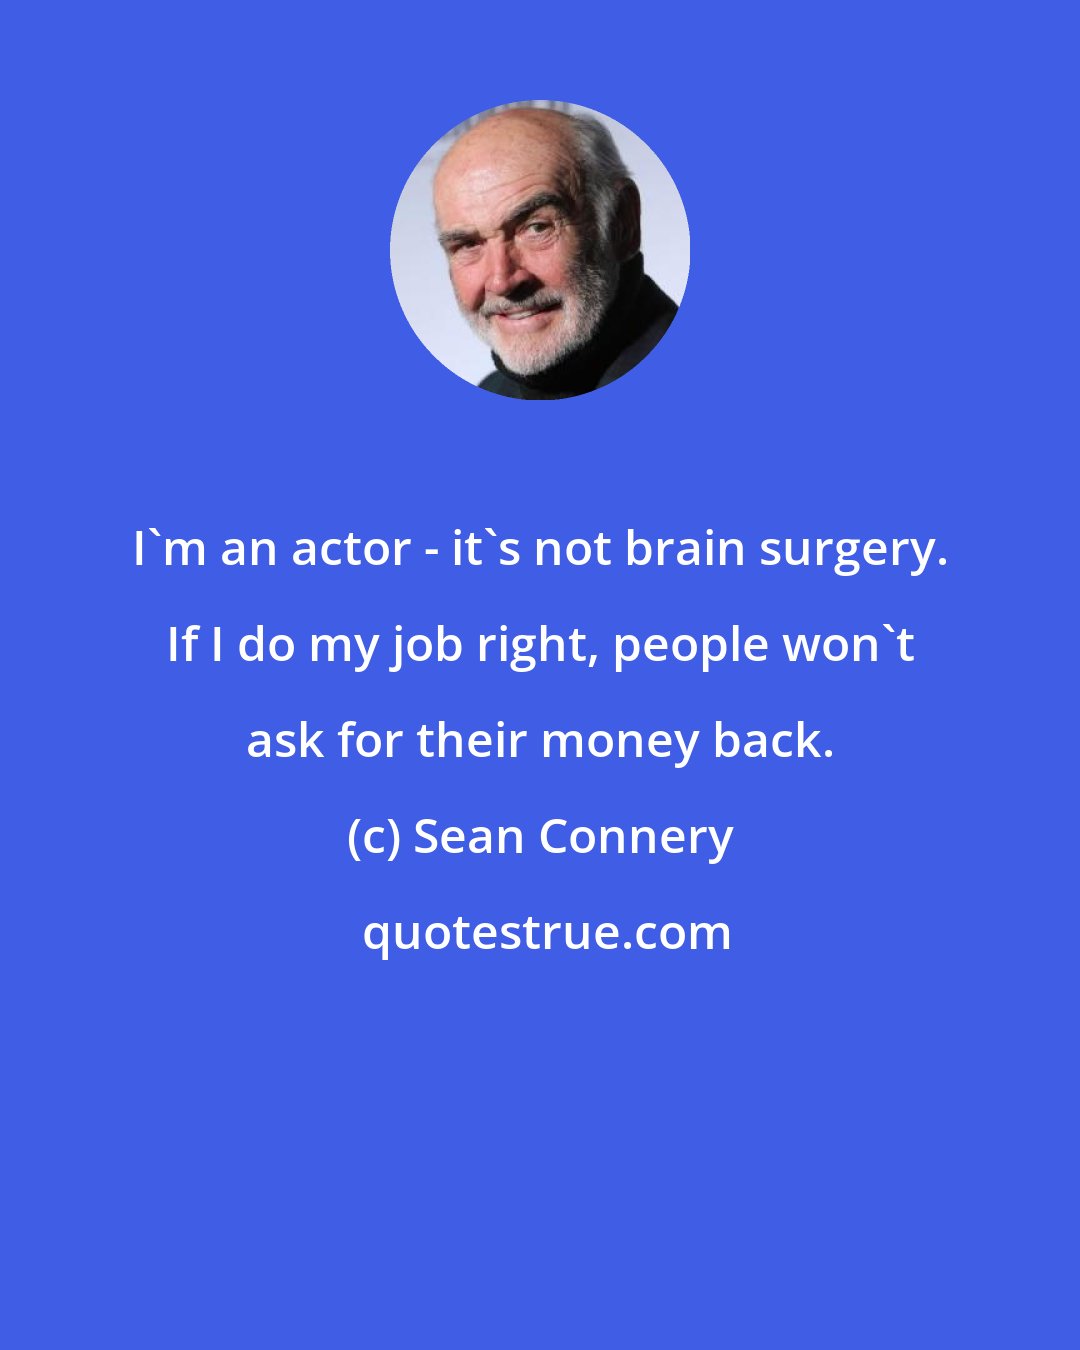 Sean Connery: I'm an actor - it's not brain surgery. If I do my job right, people won't ask for their money back.